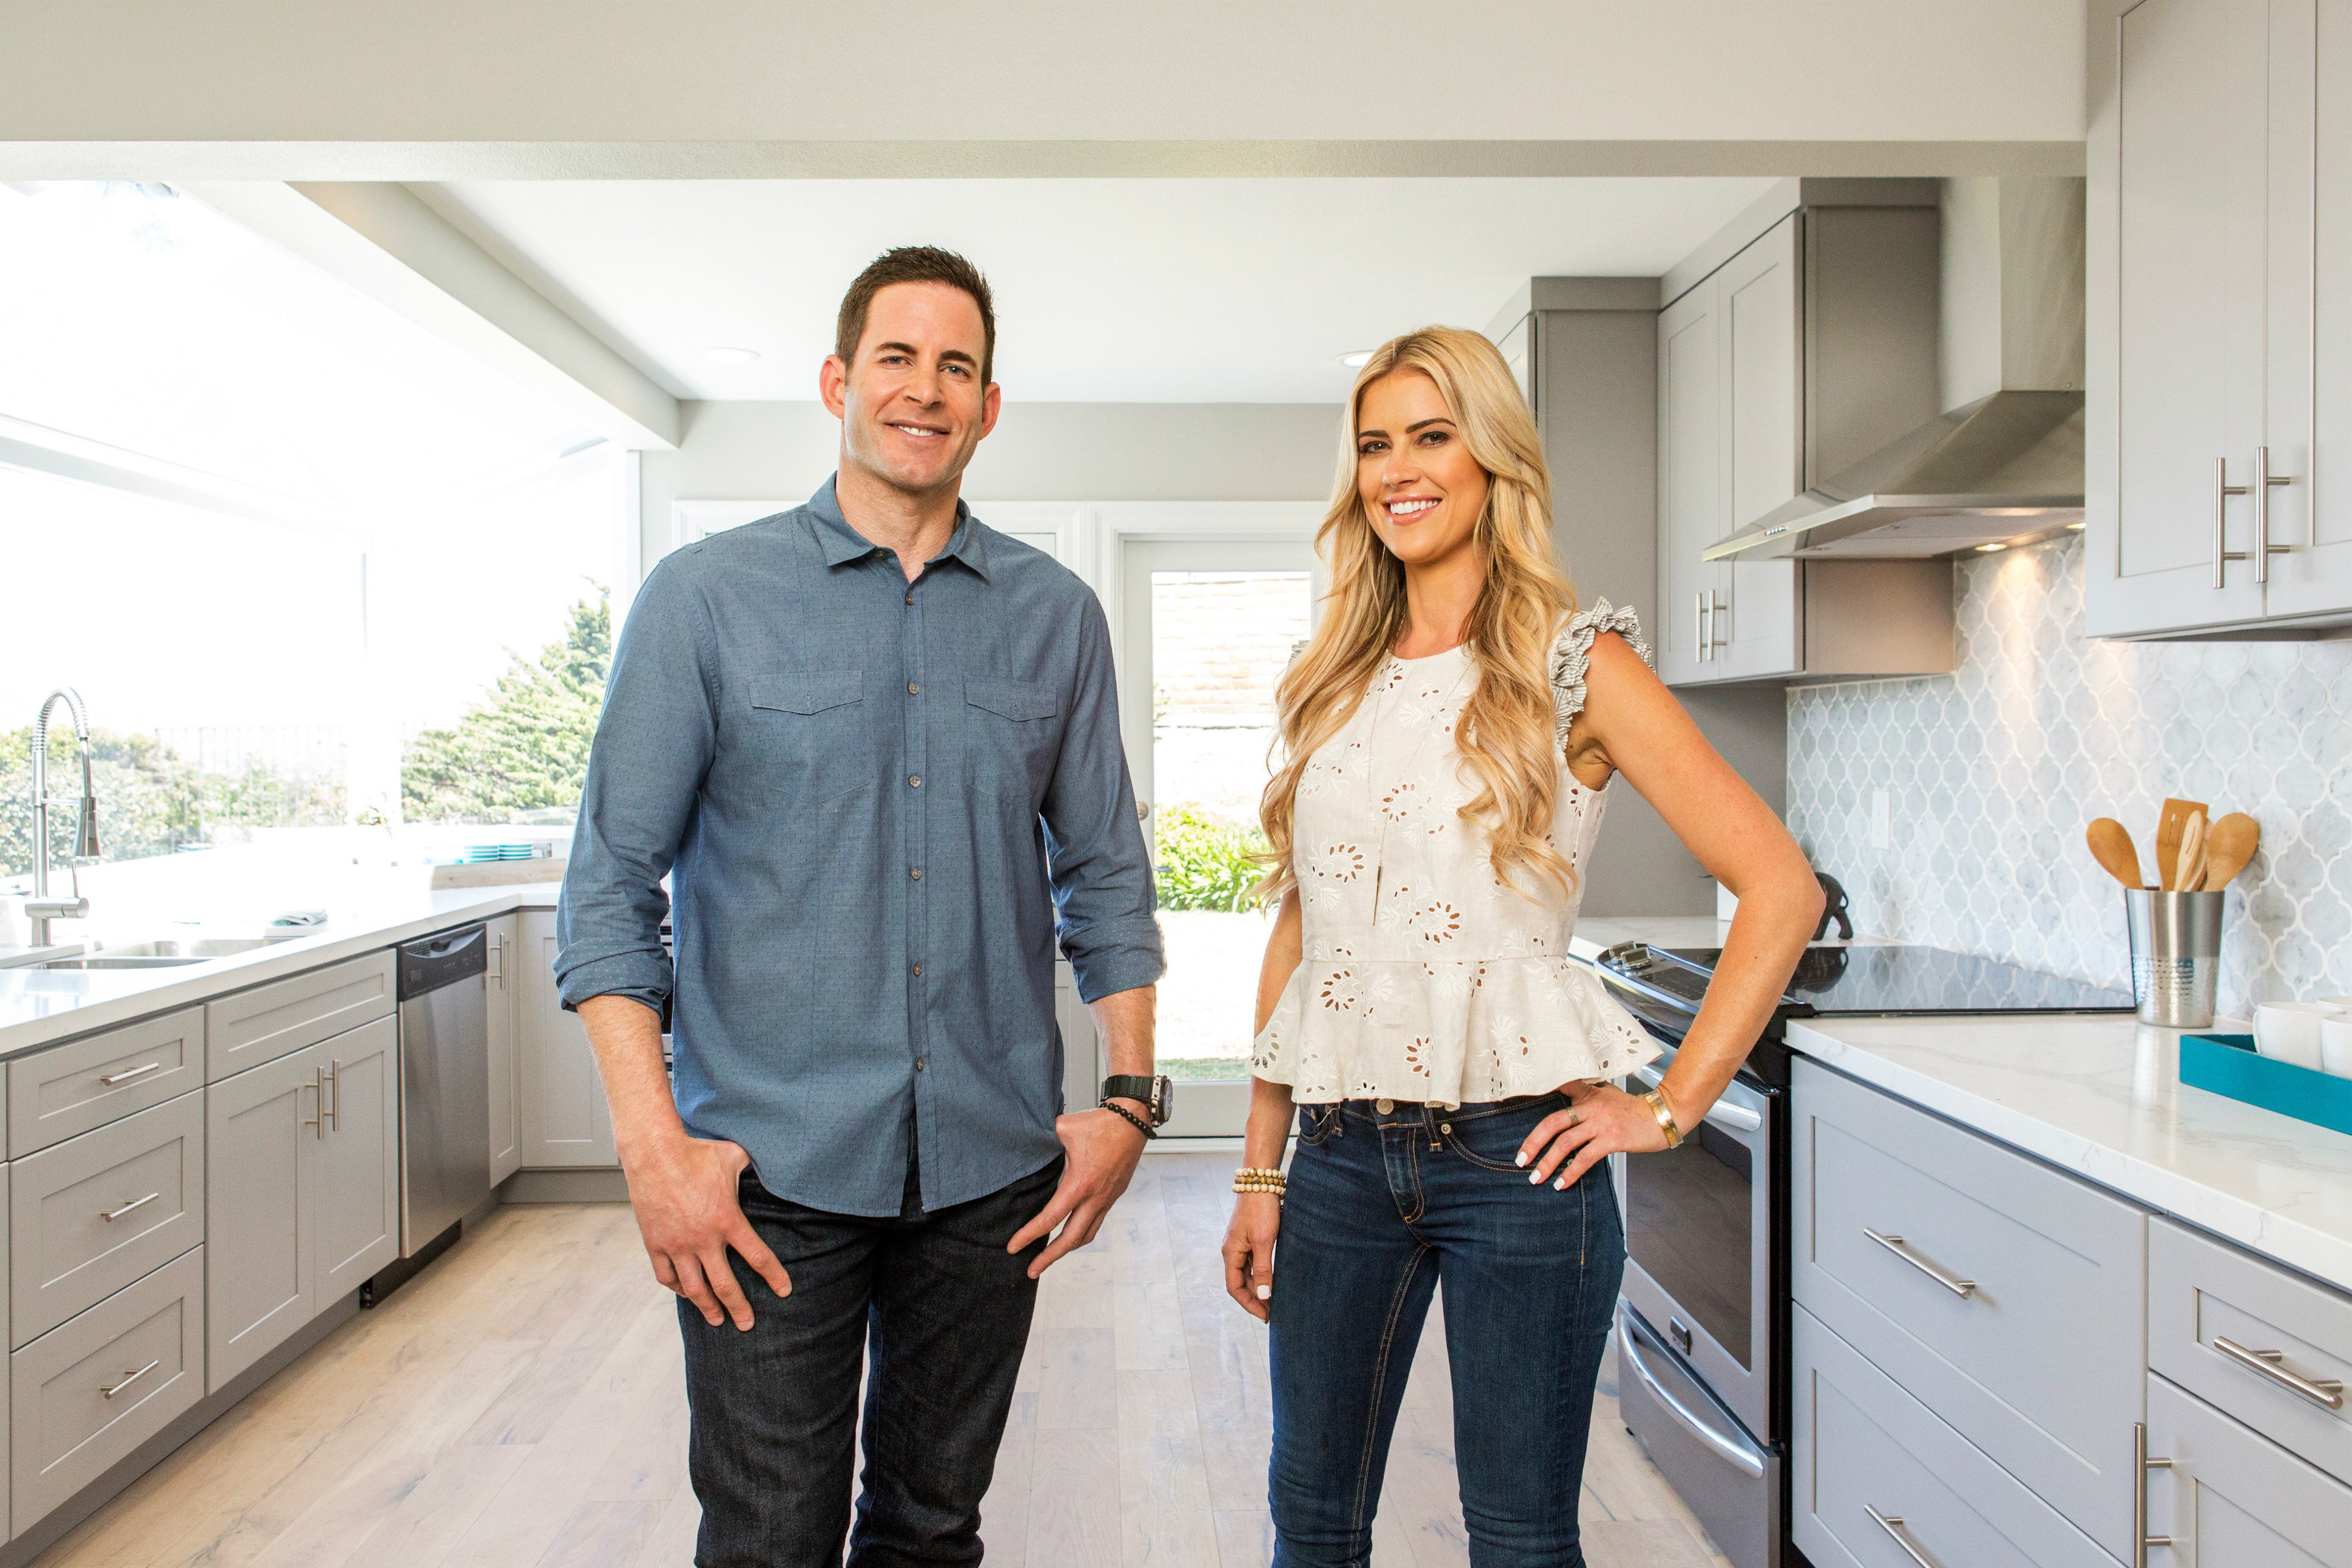 Tarek El Moussa and Christina Haack standing in a kitchen